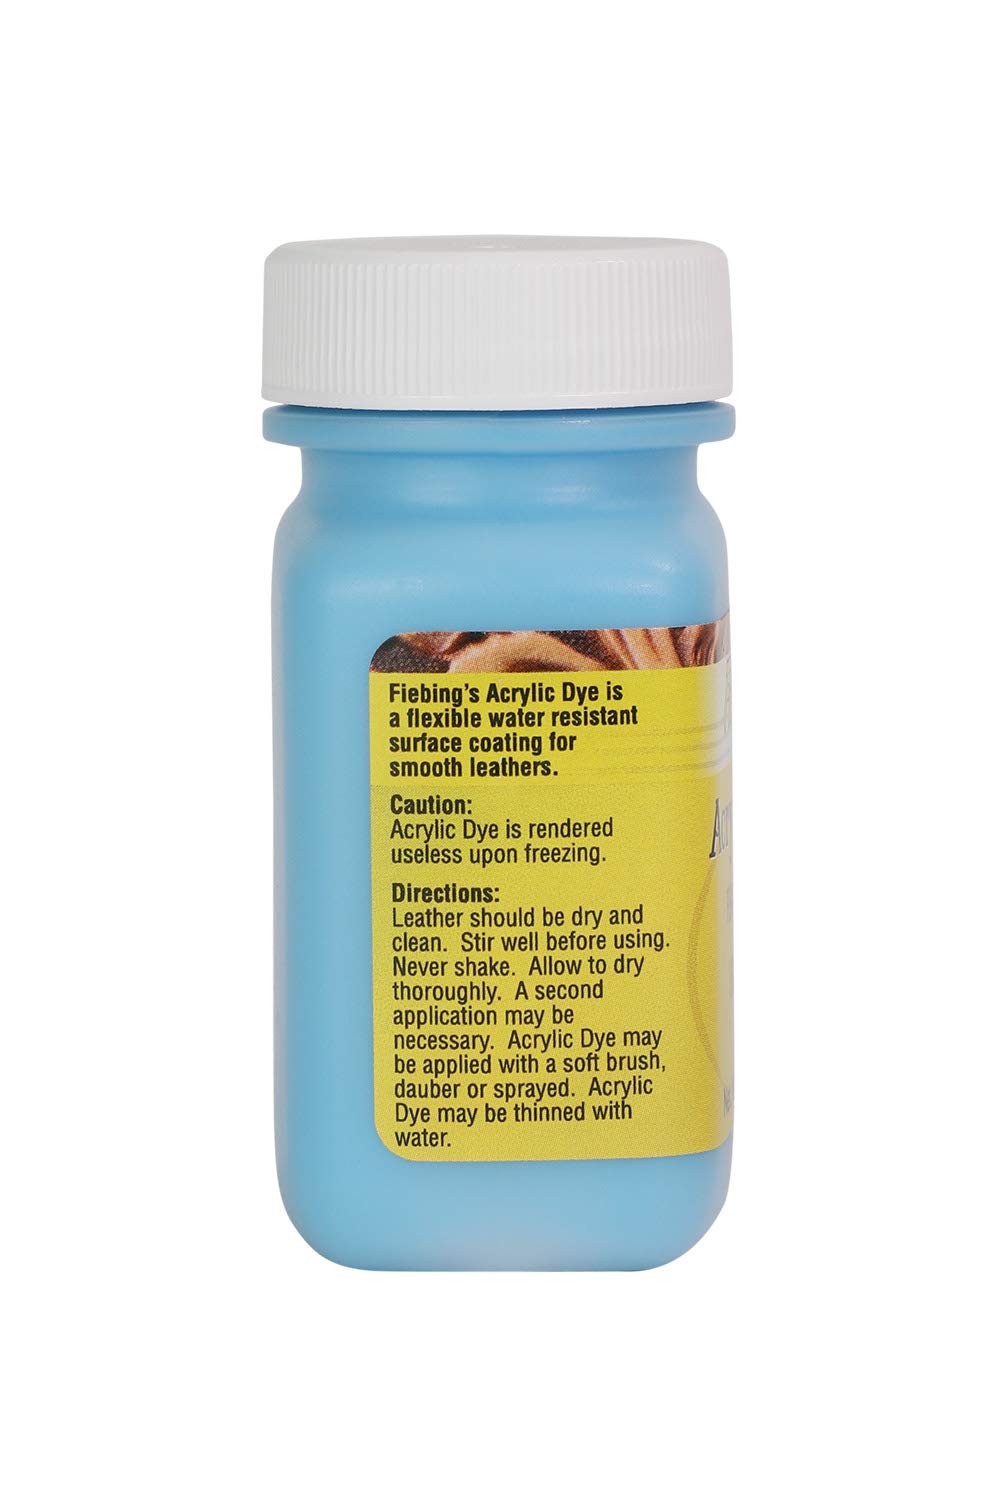 Fiebing's Acrylic Dye - Light Blue - 2oz - for Painting Leather Shoes, Bags, Designs, Scratches, Upholstery, etc